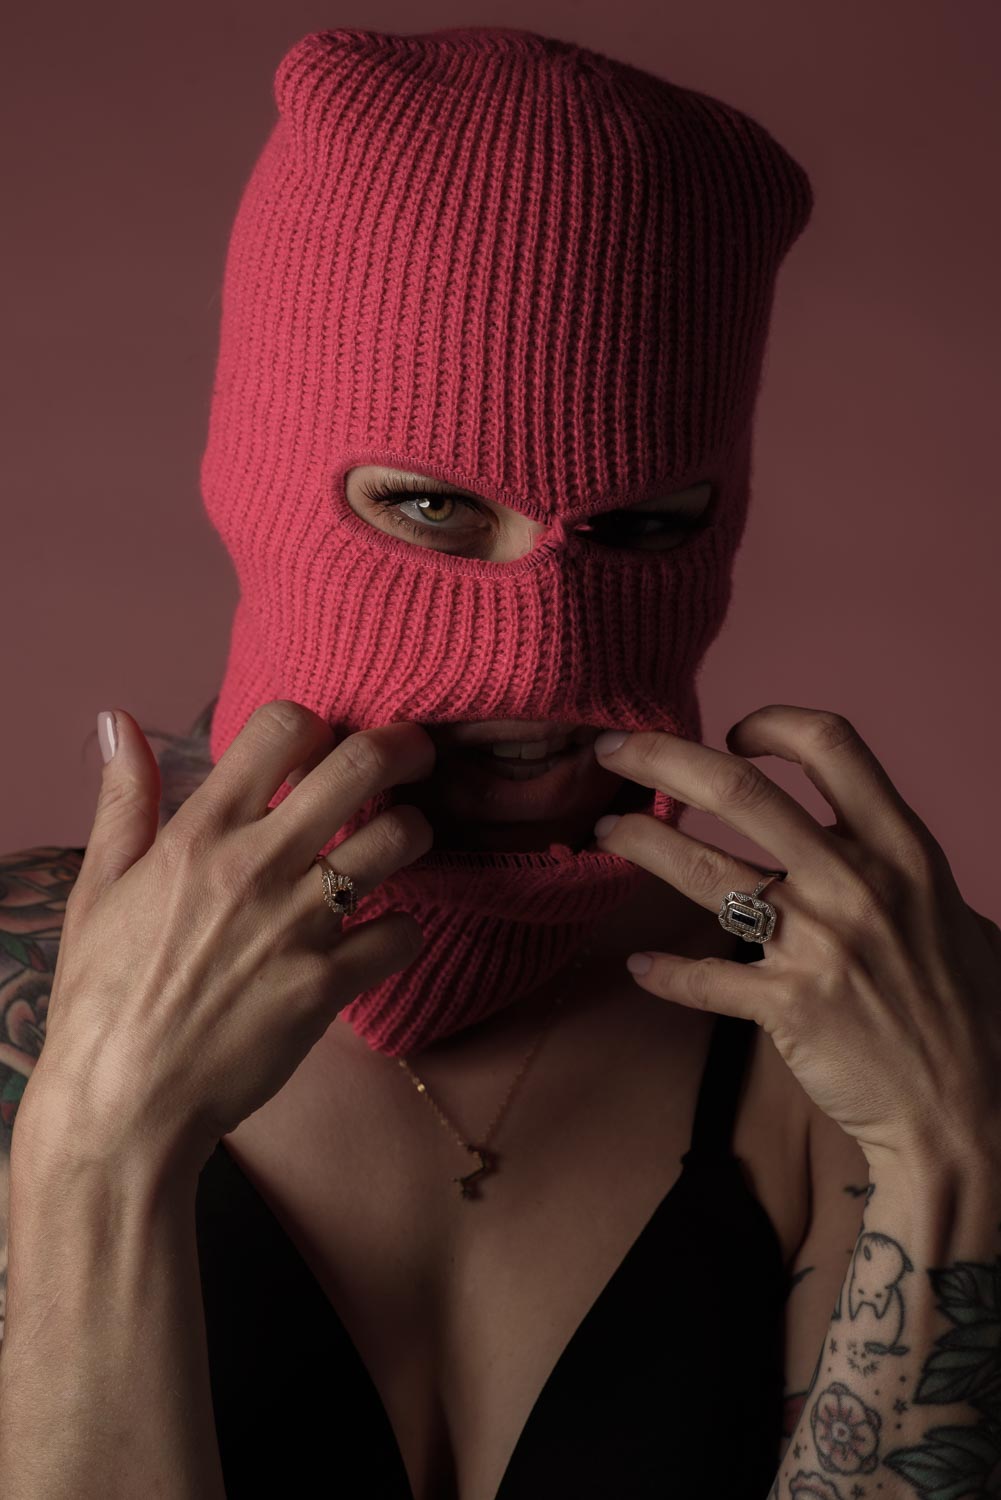 a portrait of Christina on a pink background, she is wearing a black bra and a pink ski mask and she is stretching out the mask mouth opening.